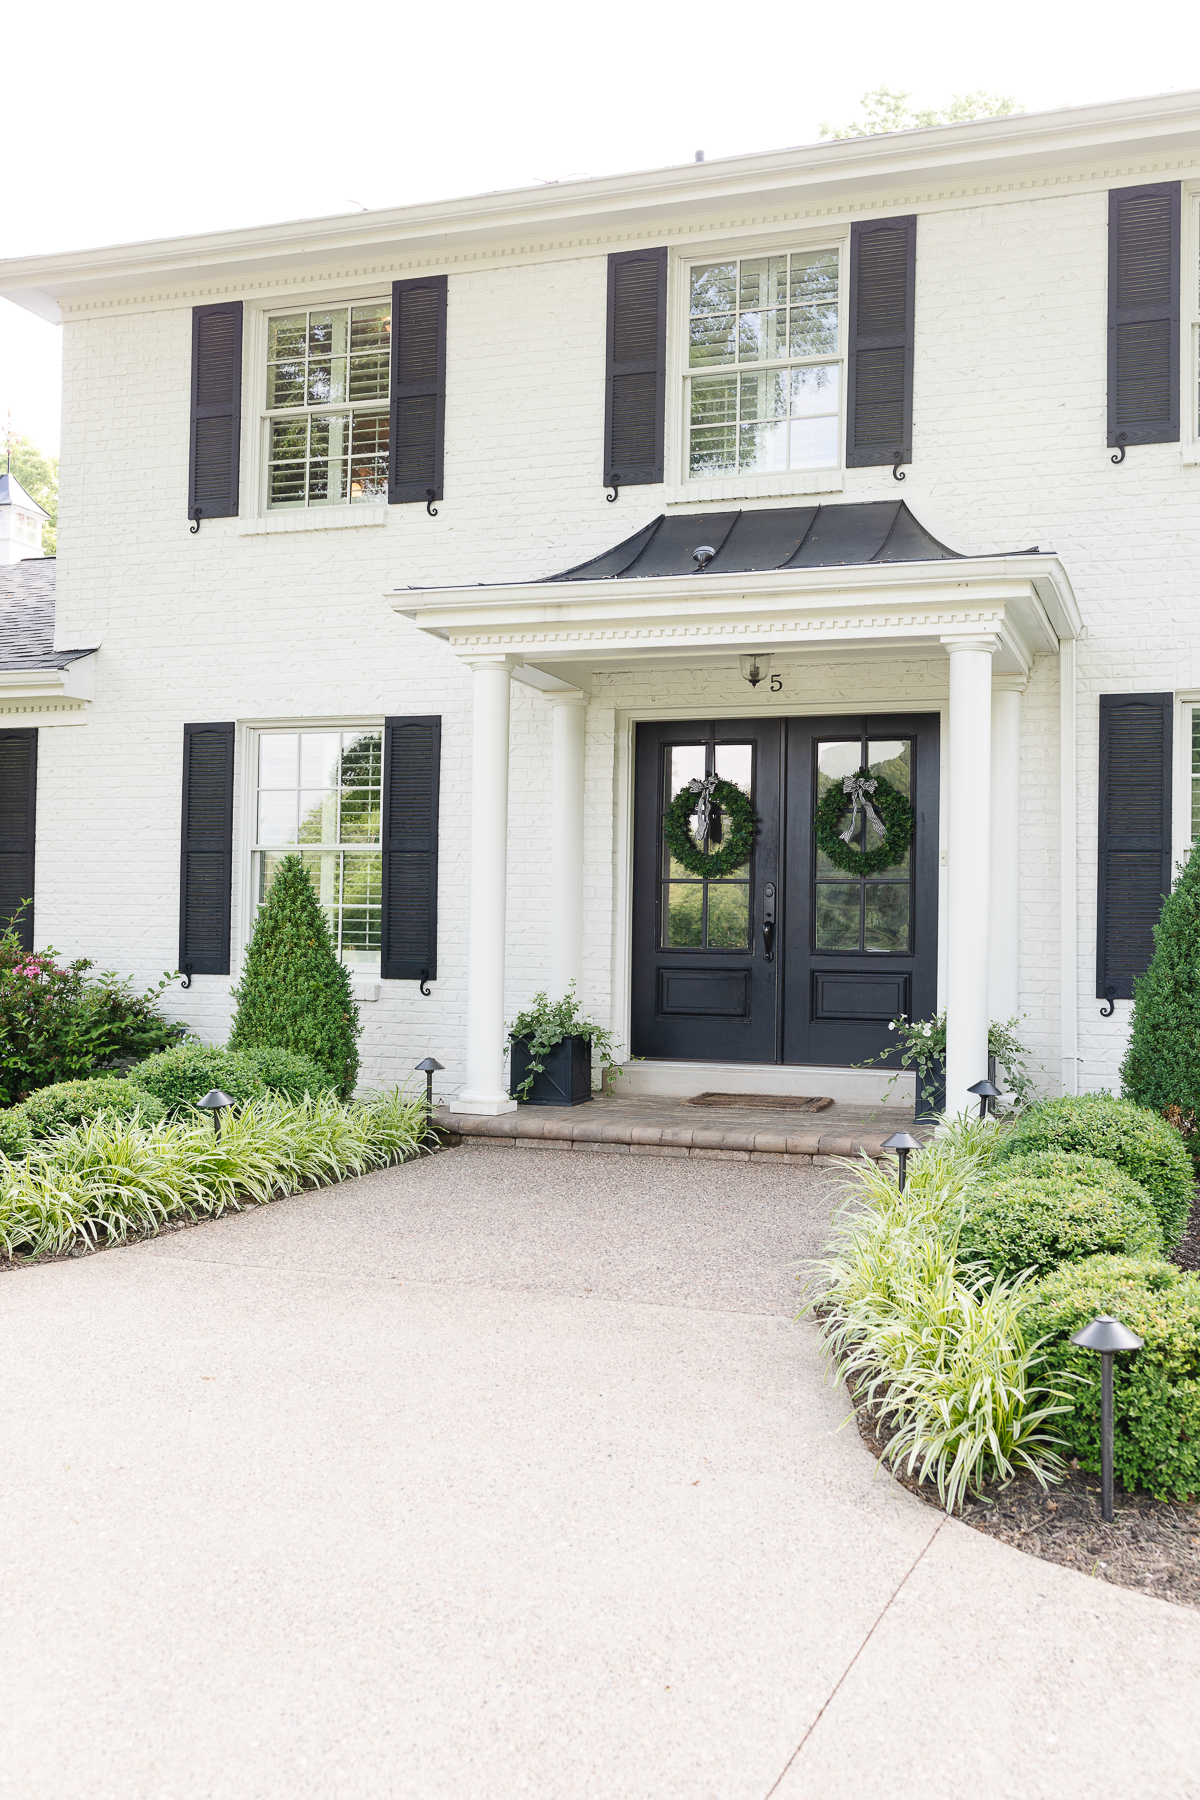 A white house with black shutters and a driveway is the perfect backdrop for front door wreaths year round.